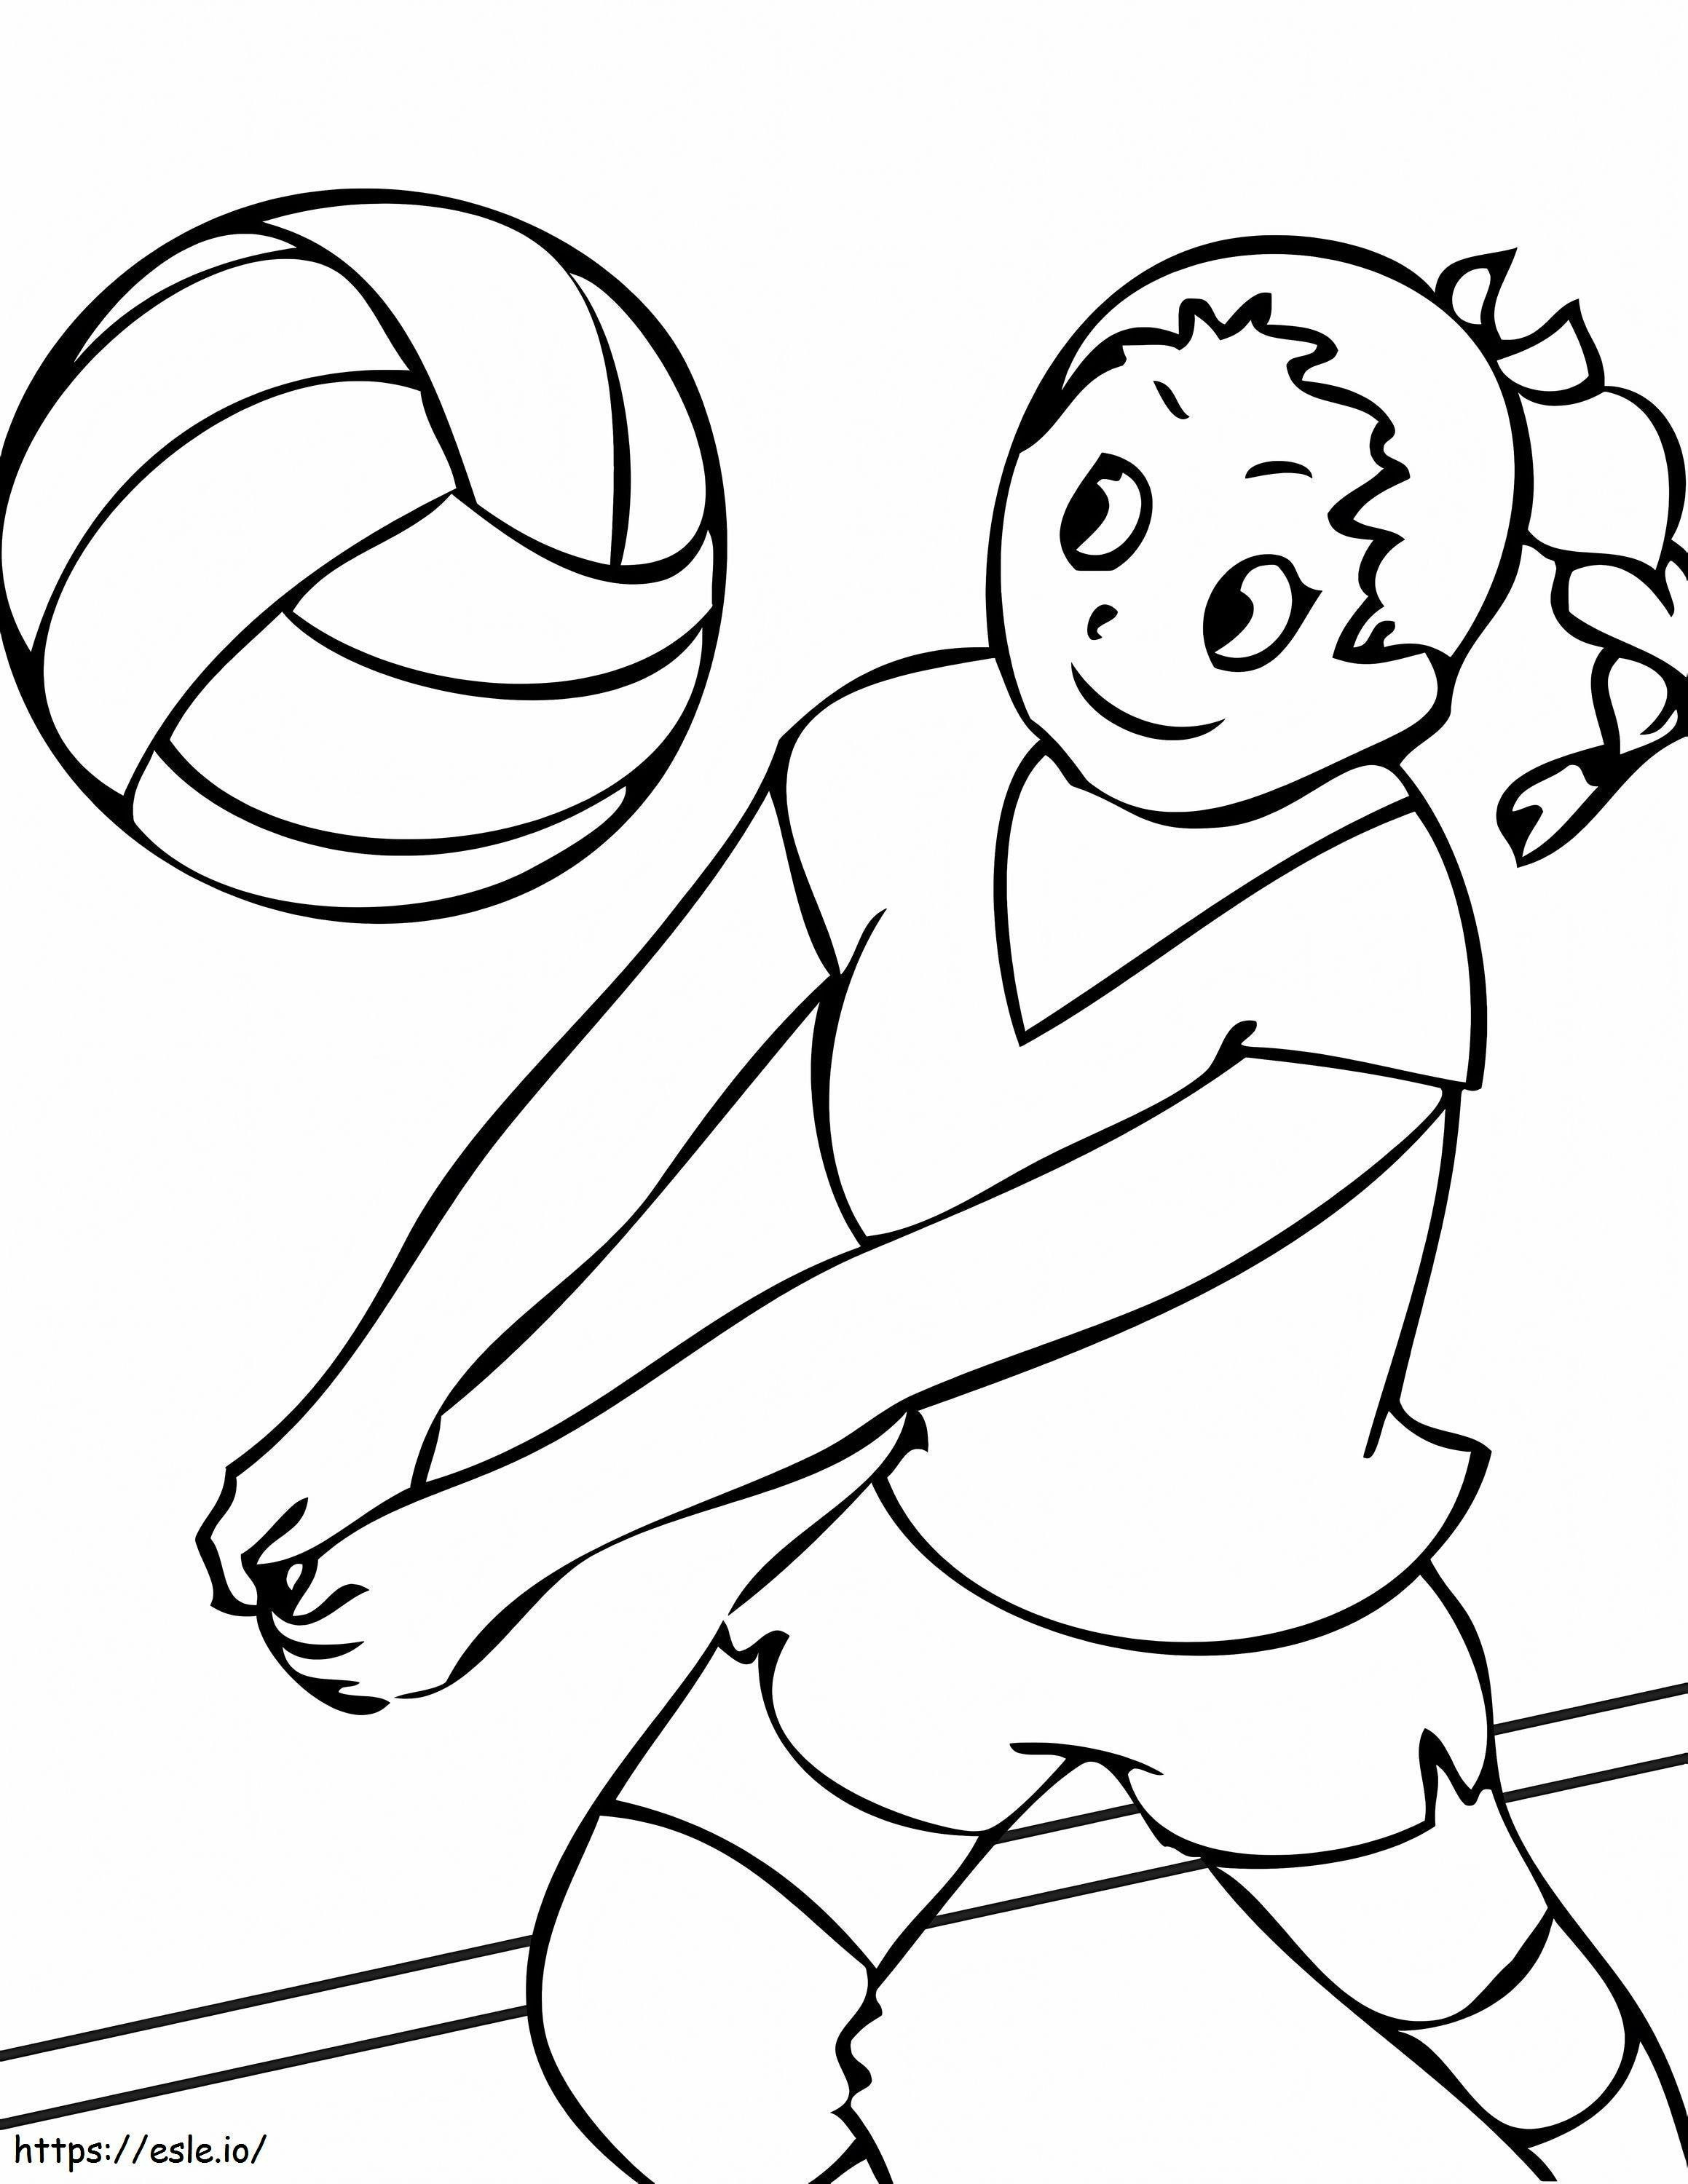 Volleyball 1 Coloring Pages  coloring page